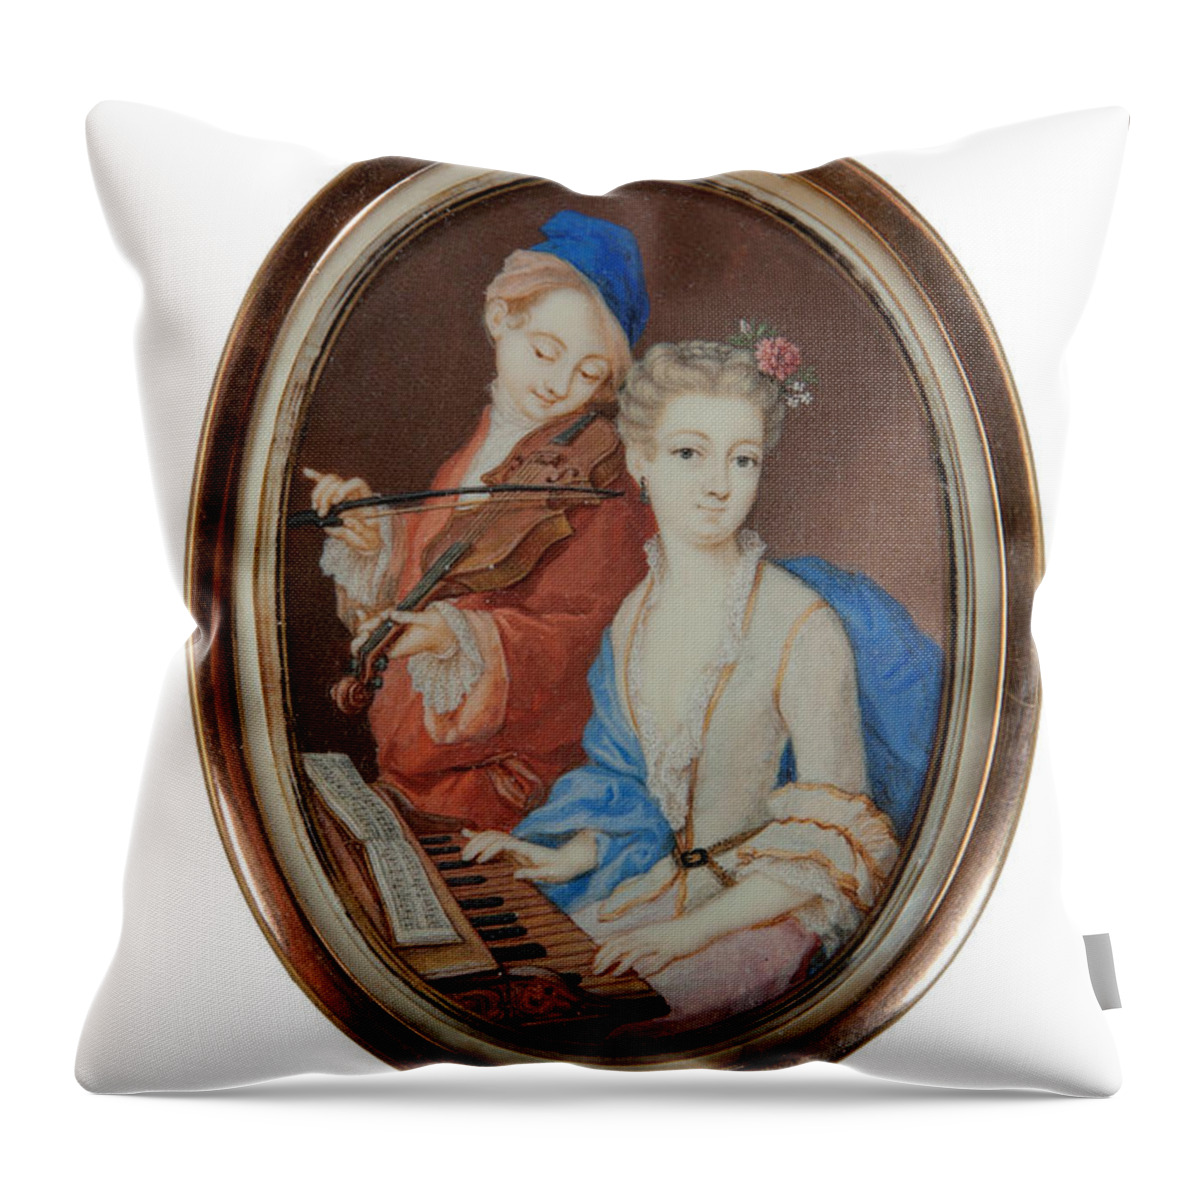 Portrait Miniature Late 18th - Early 19th Century Throw Pillow featuring the painting Portrait Miniature by MotionAge Designs